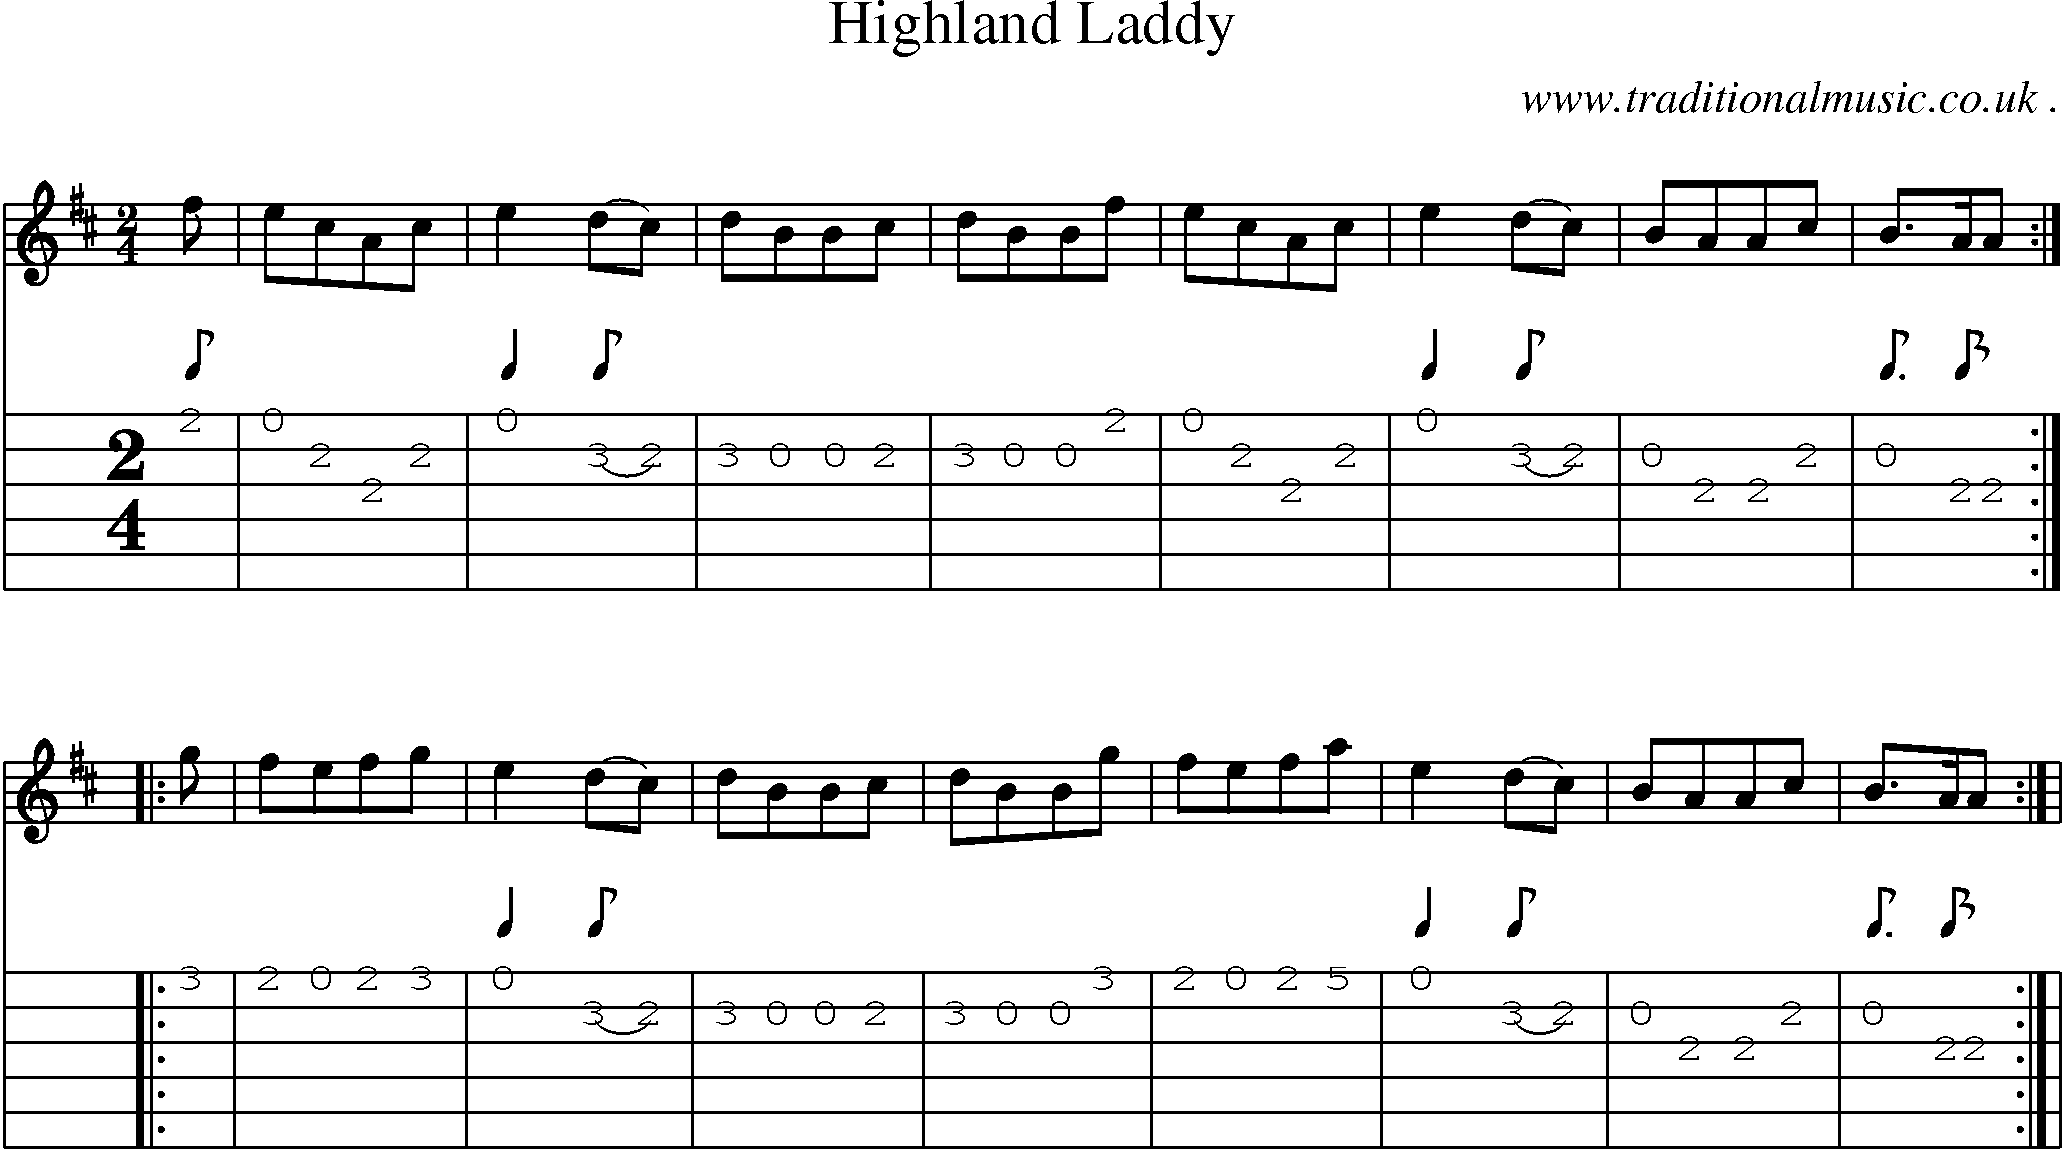 Sheet-Music and Guitar Tabs for Highland Laddy